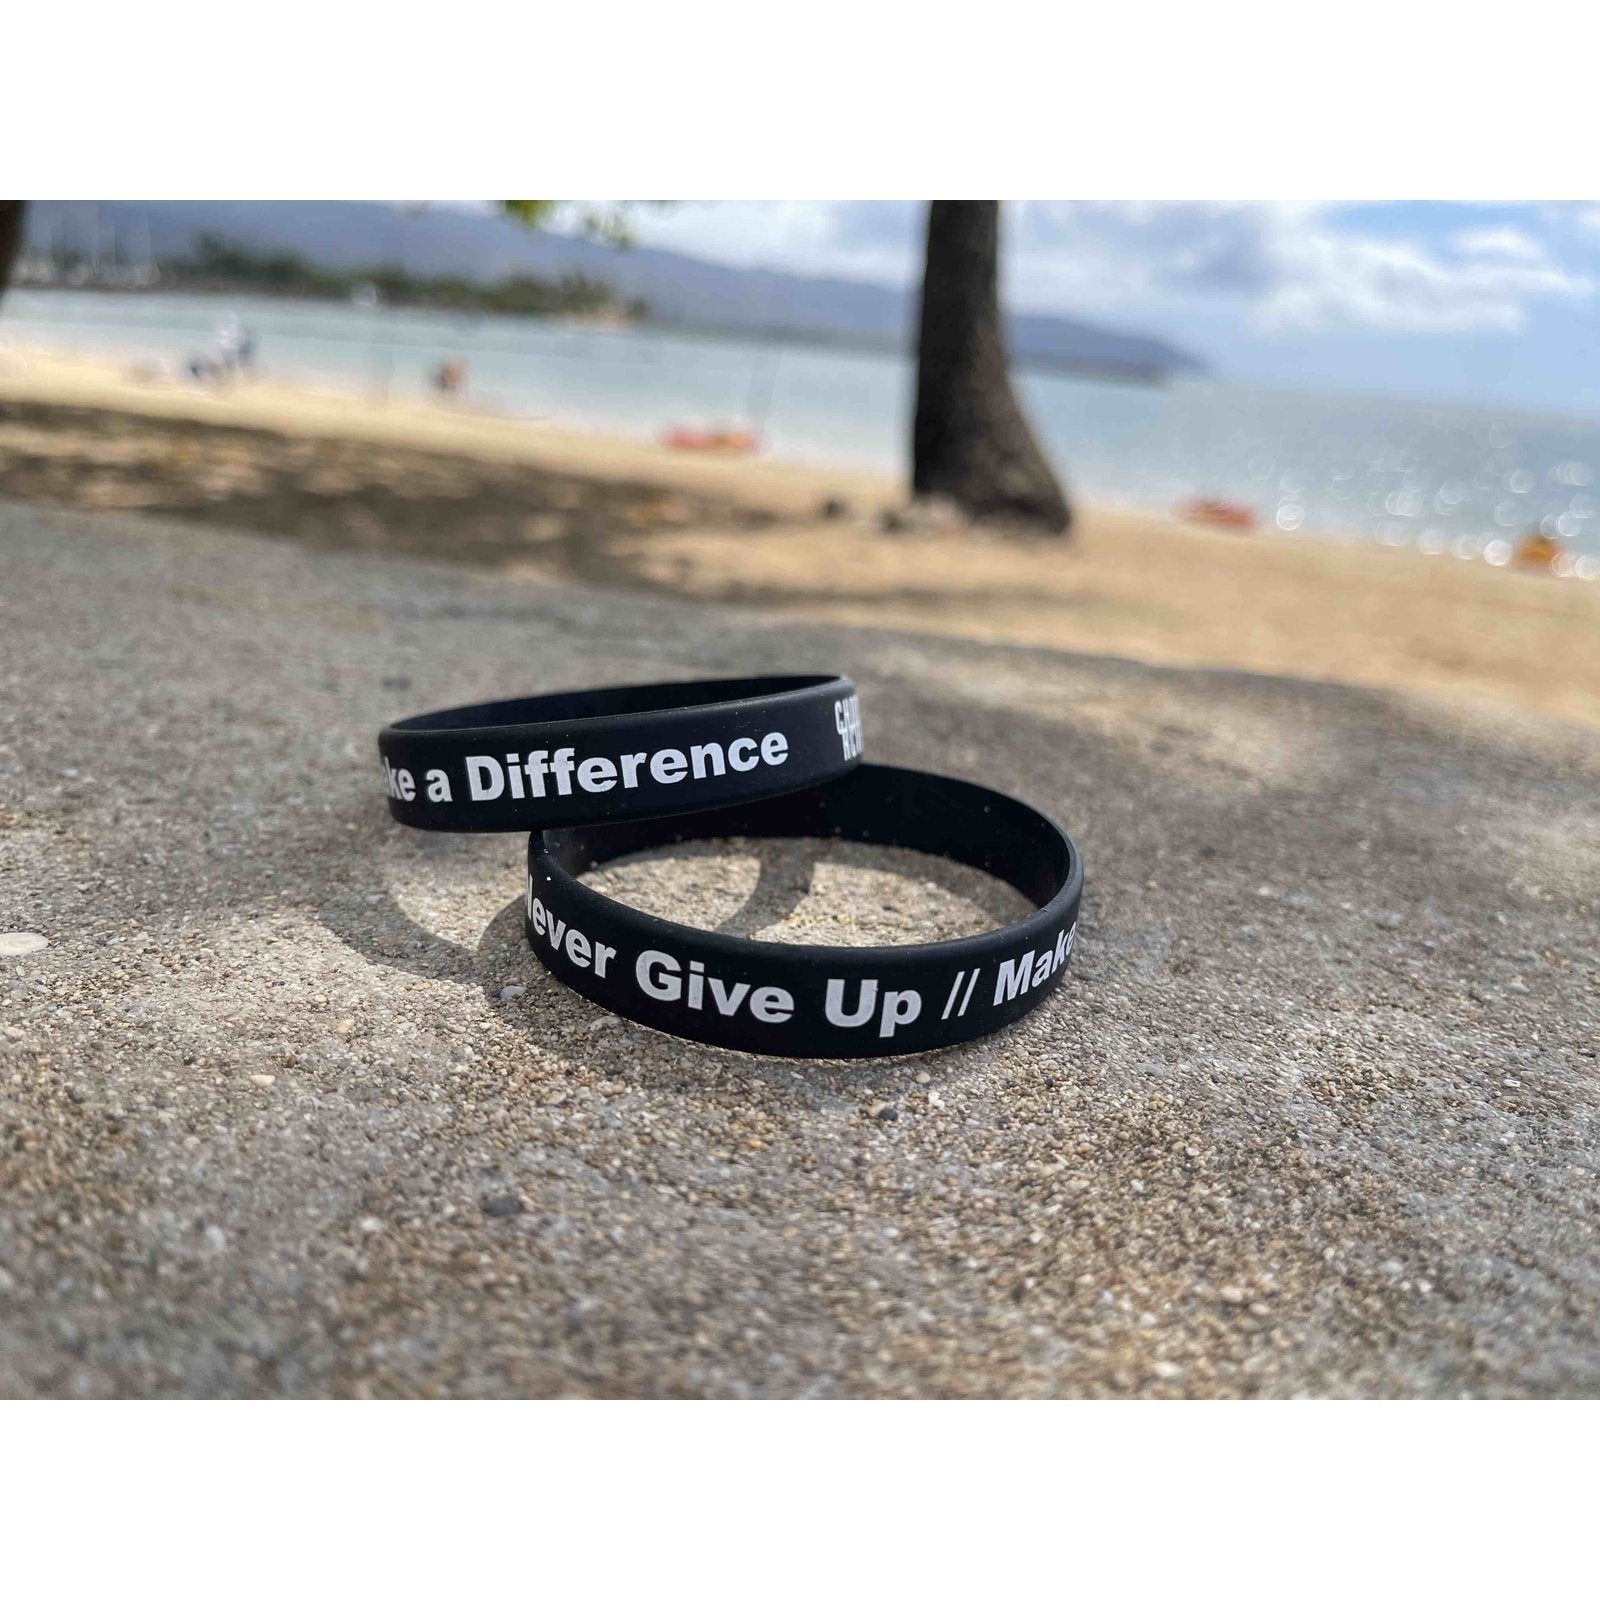 Never Give Up Make a Difference Wristbands